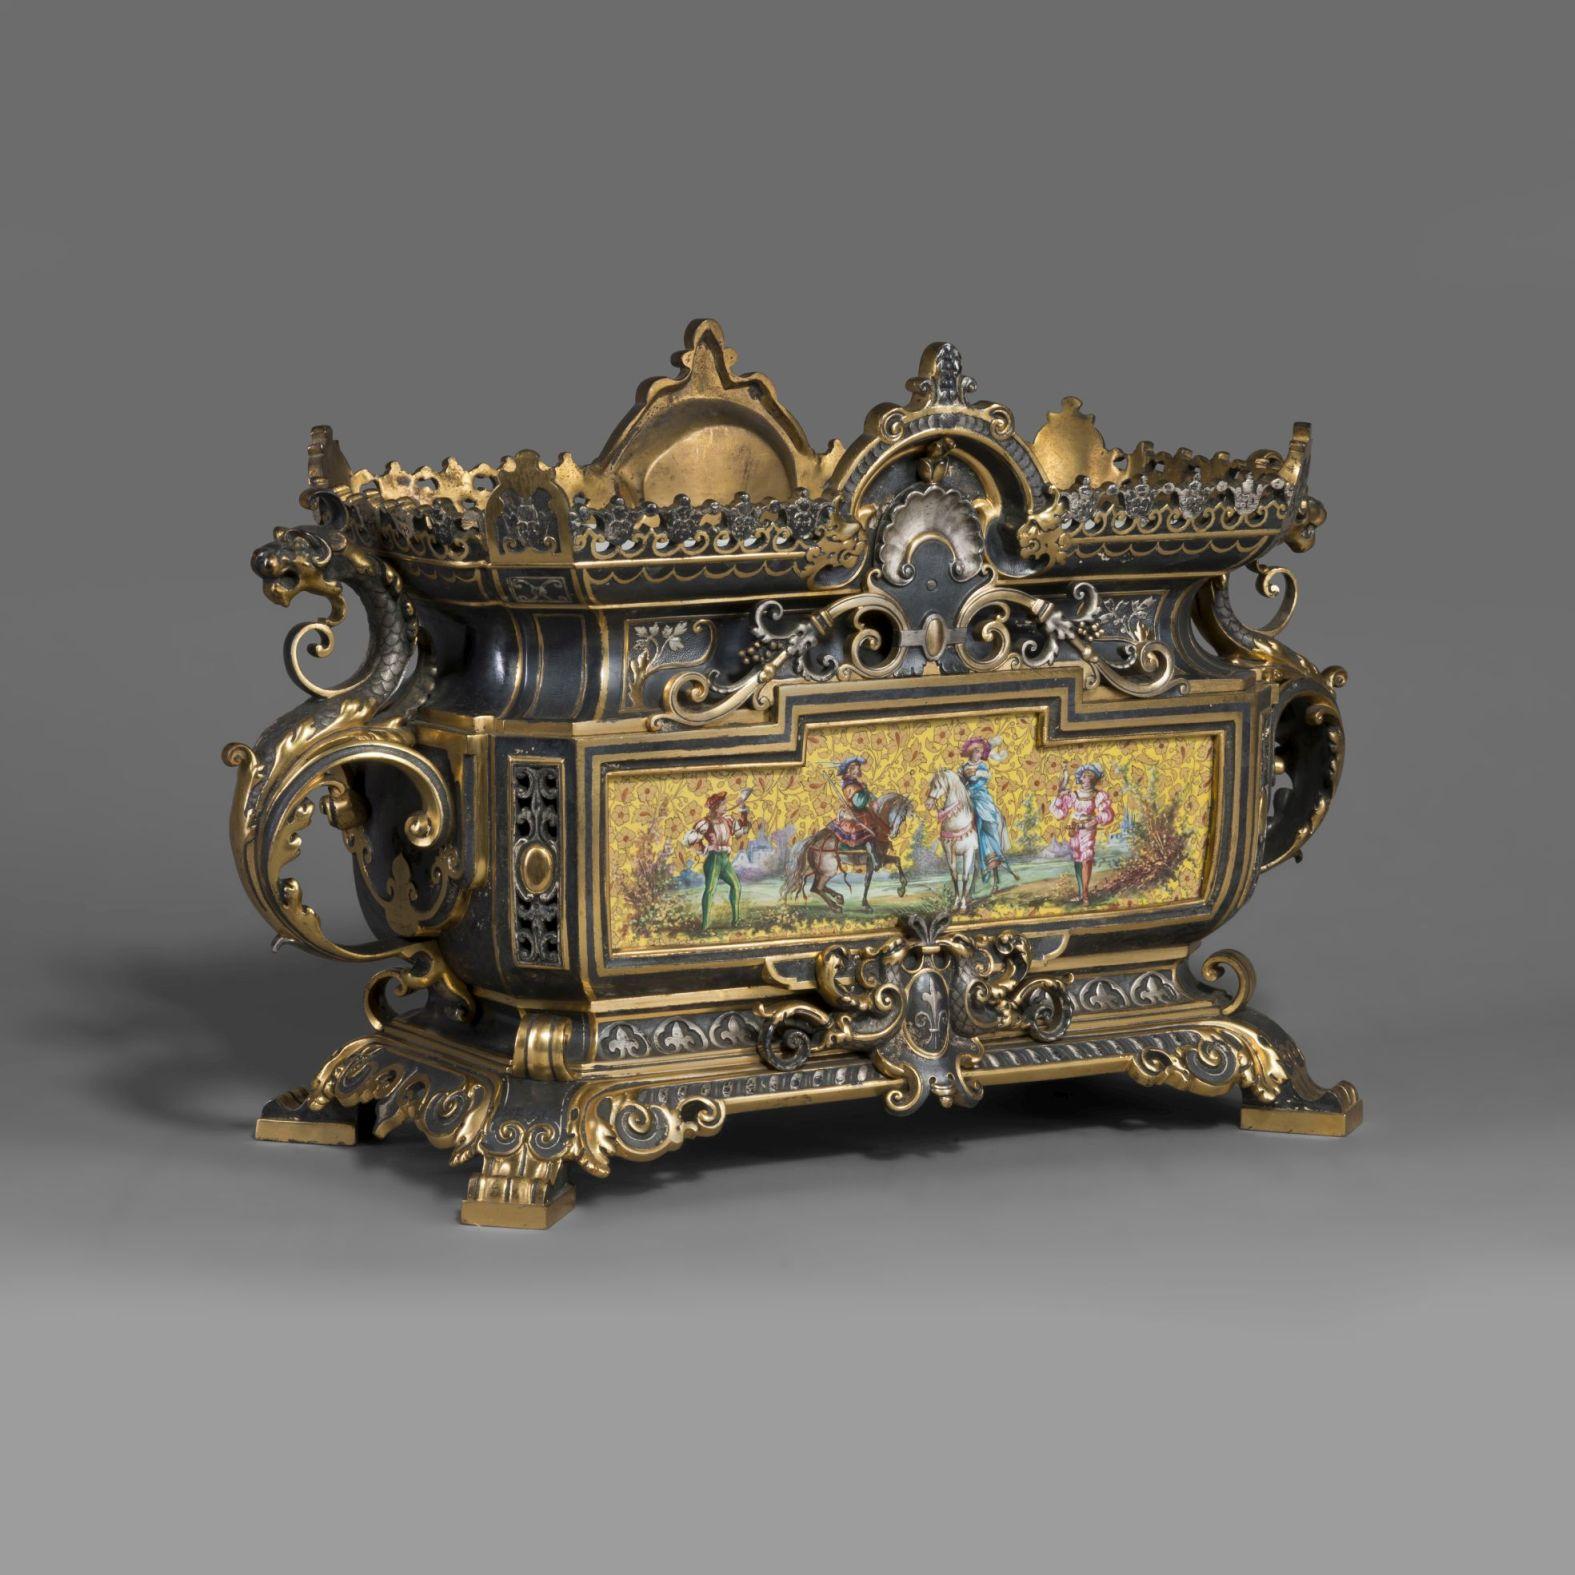 An important and very rare renaissance style porcelain mounted jardinière.

This striking jardinière cast in gilded, silvered and patinated bronze with acanthus and chimeras is mounted with finely painted porcelain plaques depicting a falconry